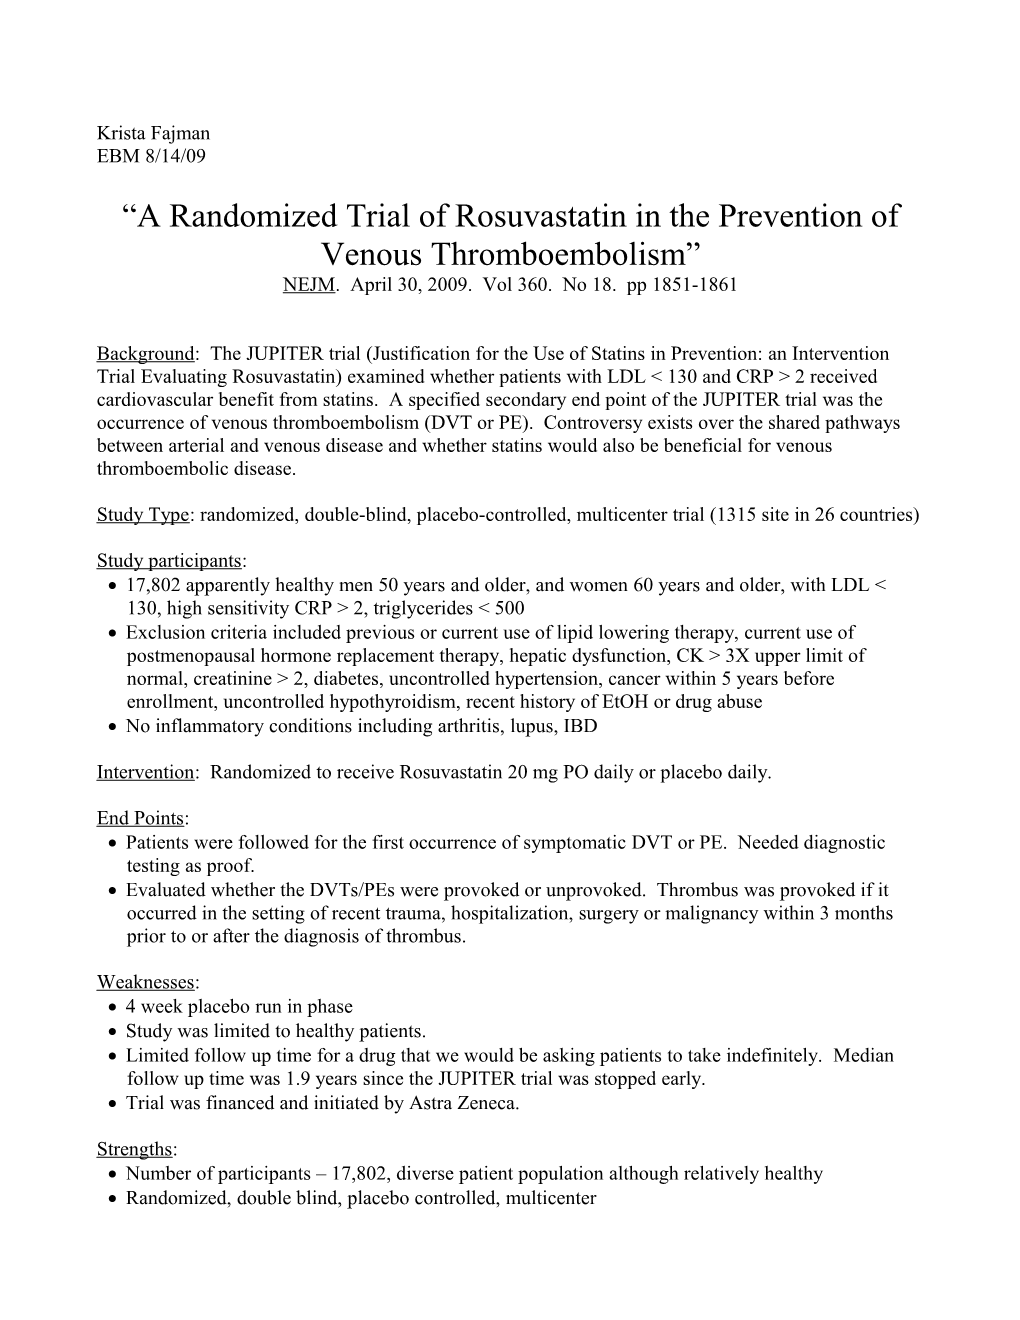 A Randomized Trial of Rosuvastatin in the Prevention of Venous Thromboembolism